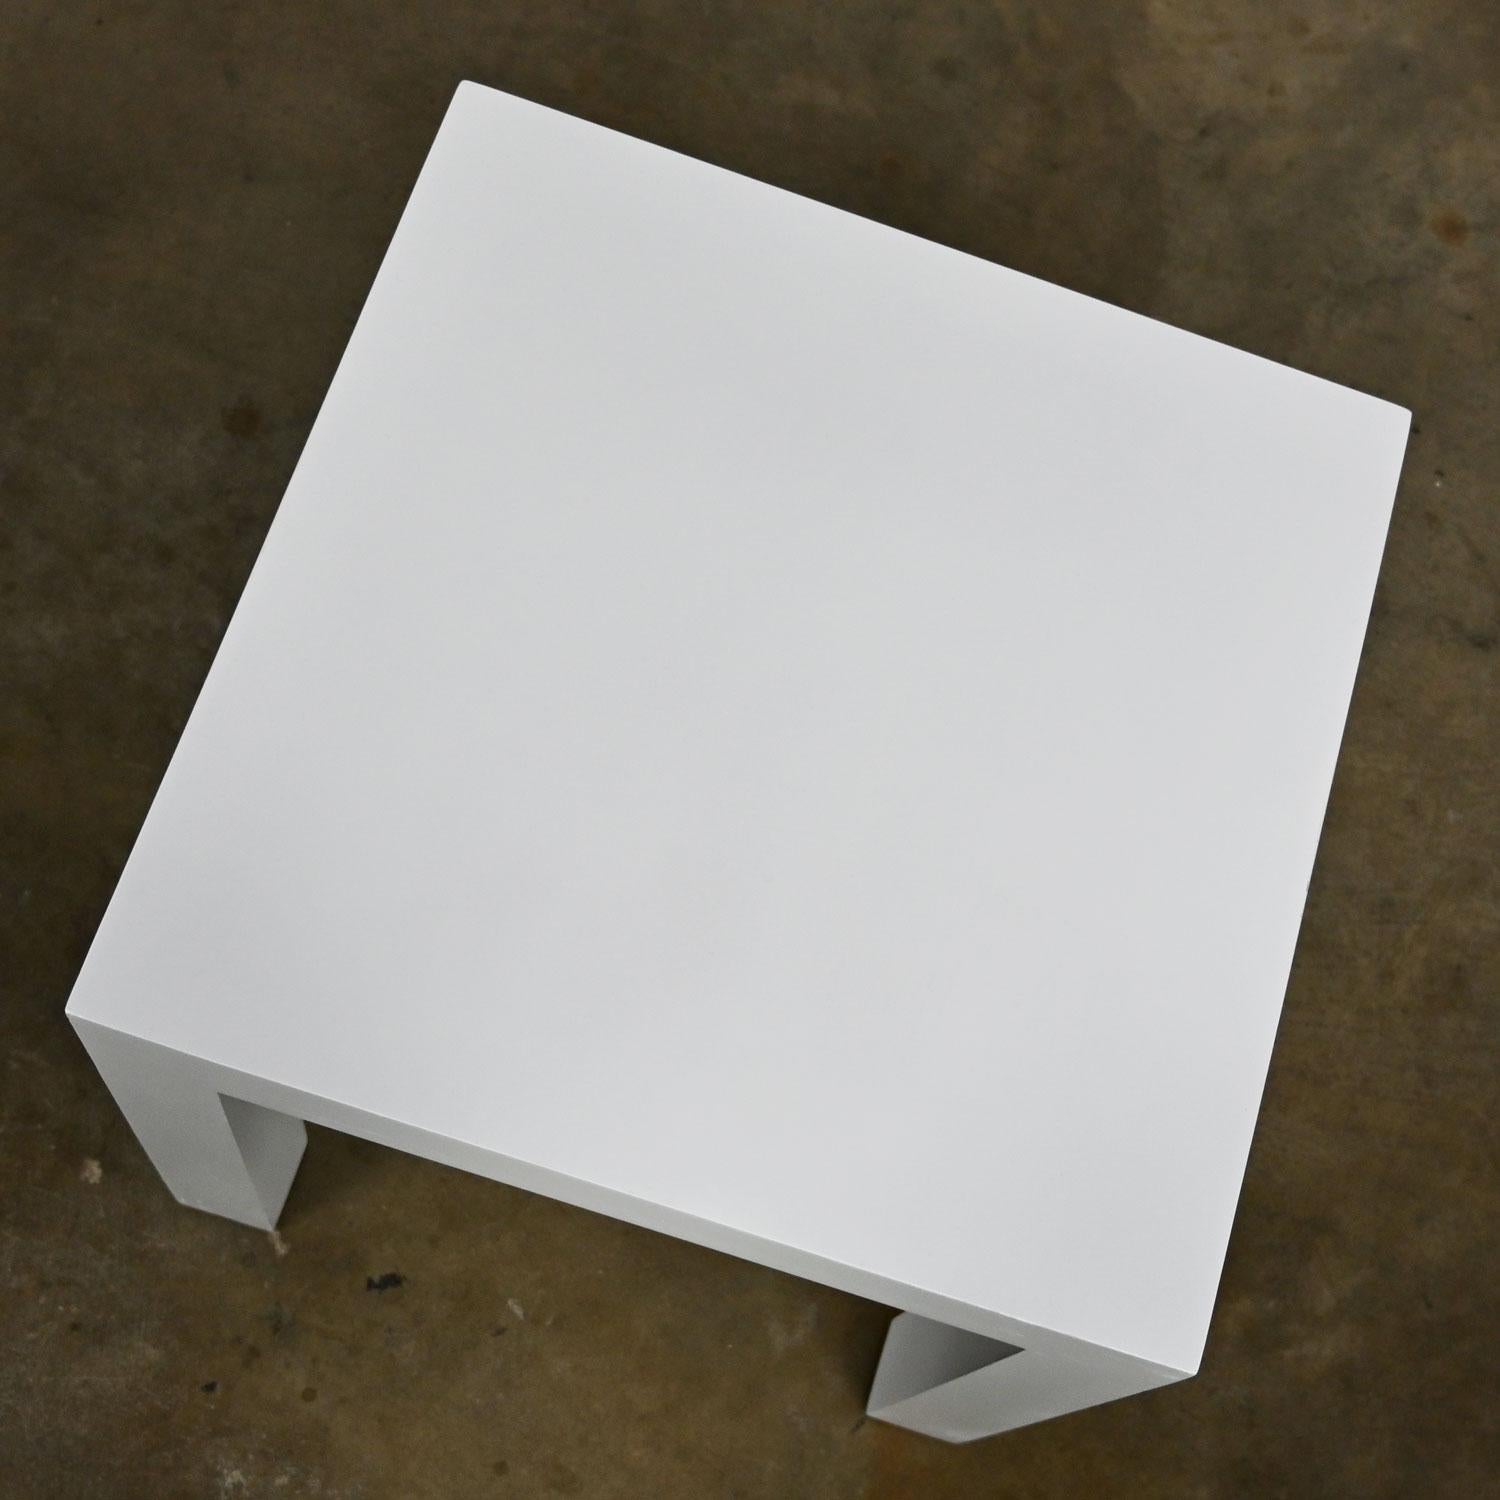 Milo Baughman Thayer Coggin Environment 70 Sq White Painted Parsons Side Table In Good Condition For Sale In Topeka, KS